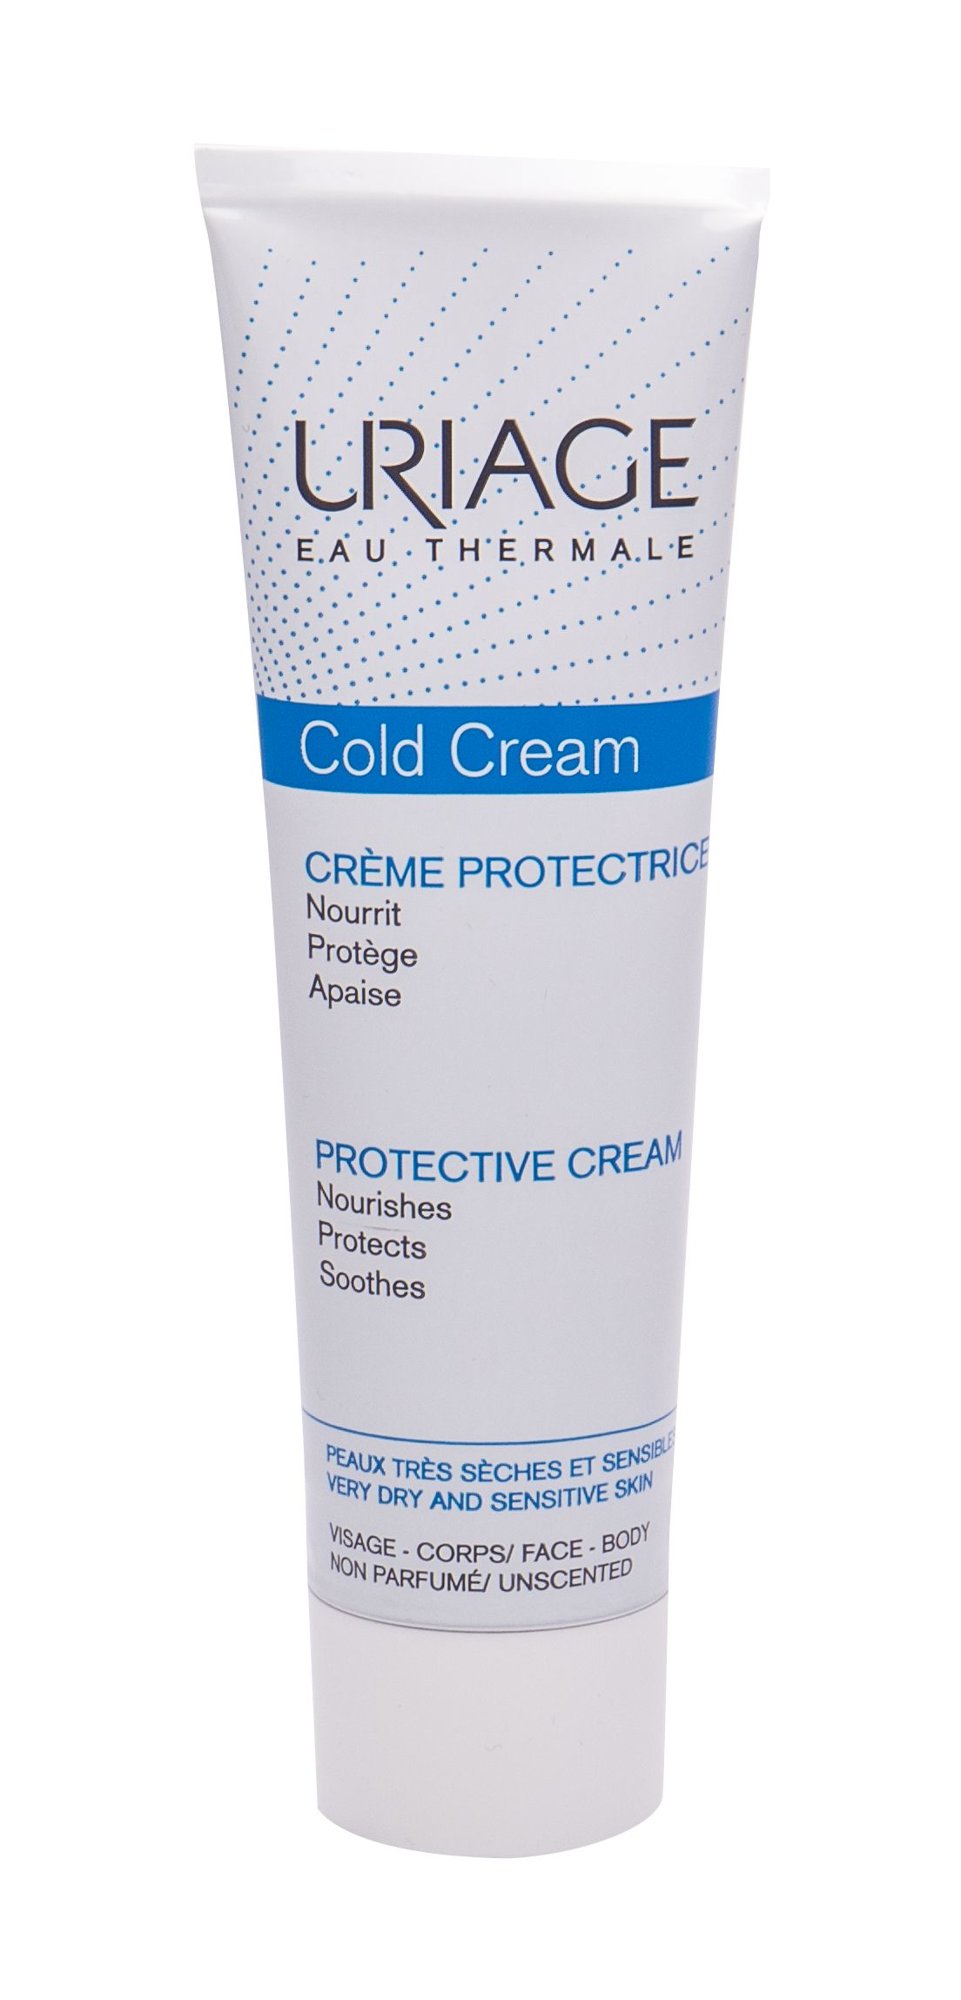 Uriage Eau Thermale Cold Cream